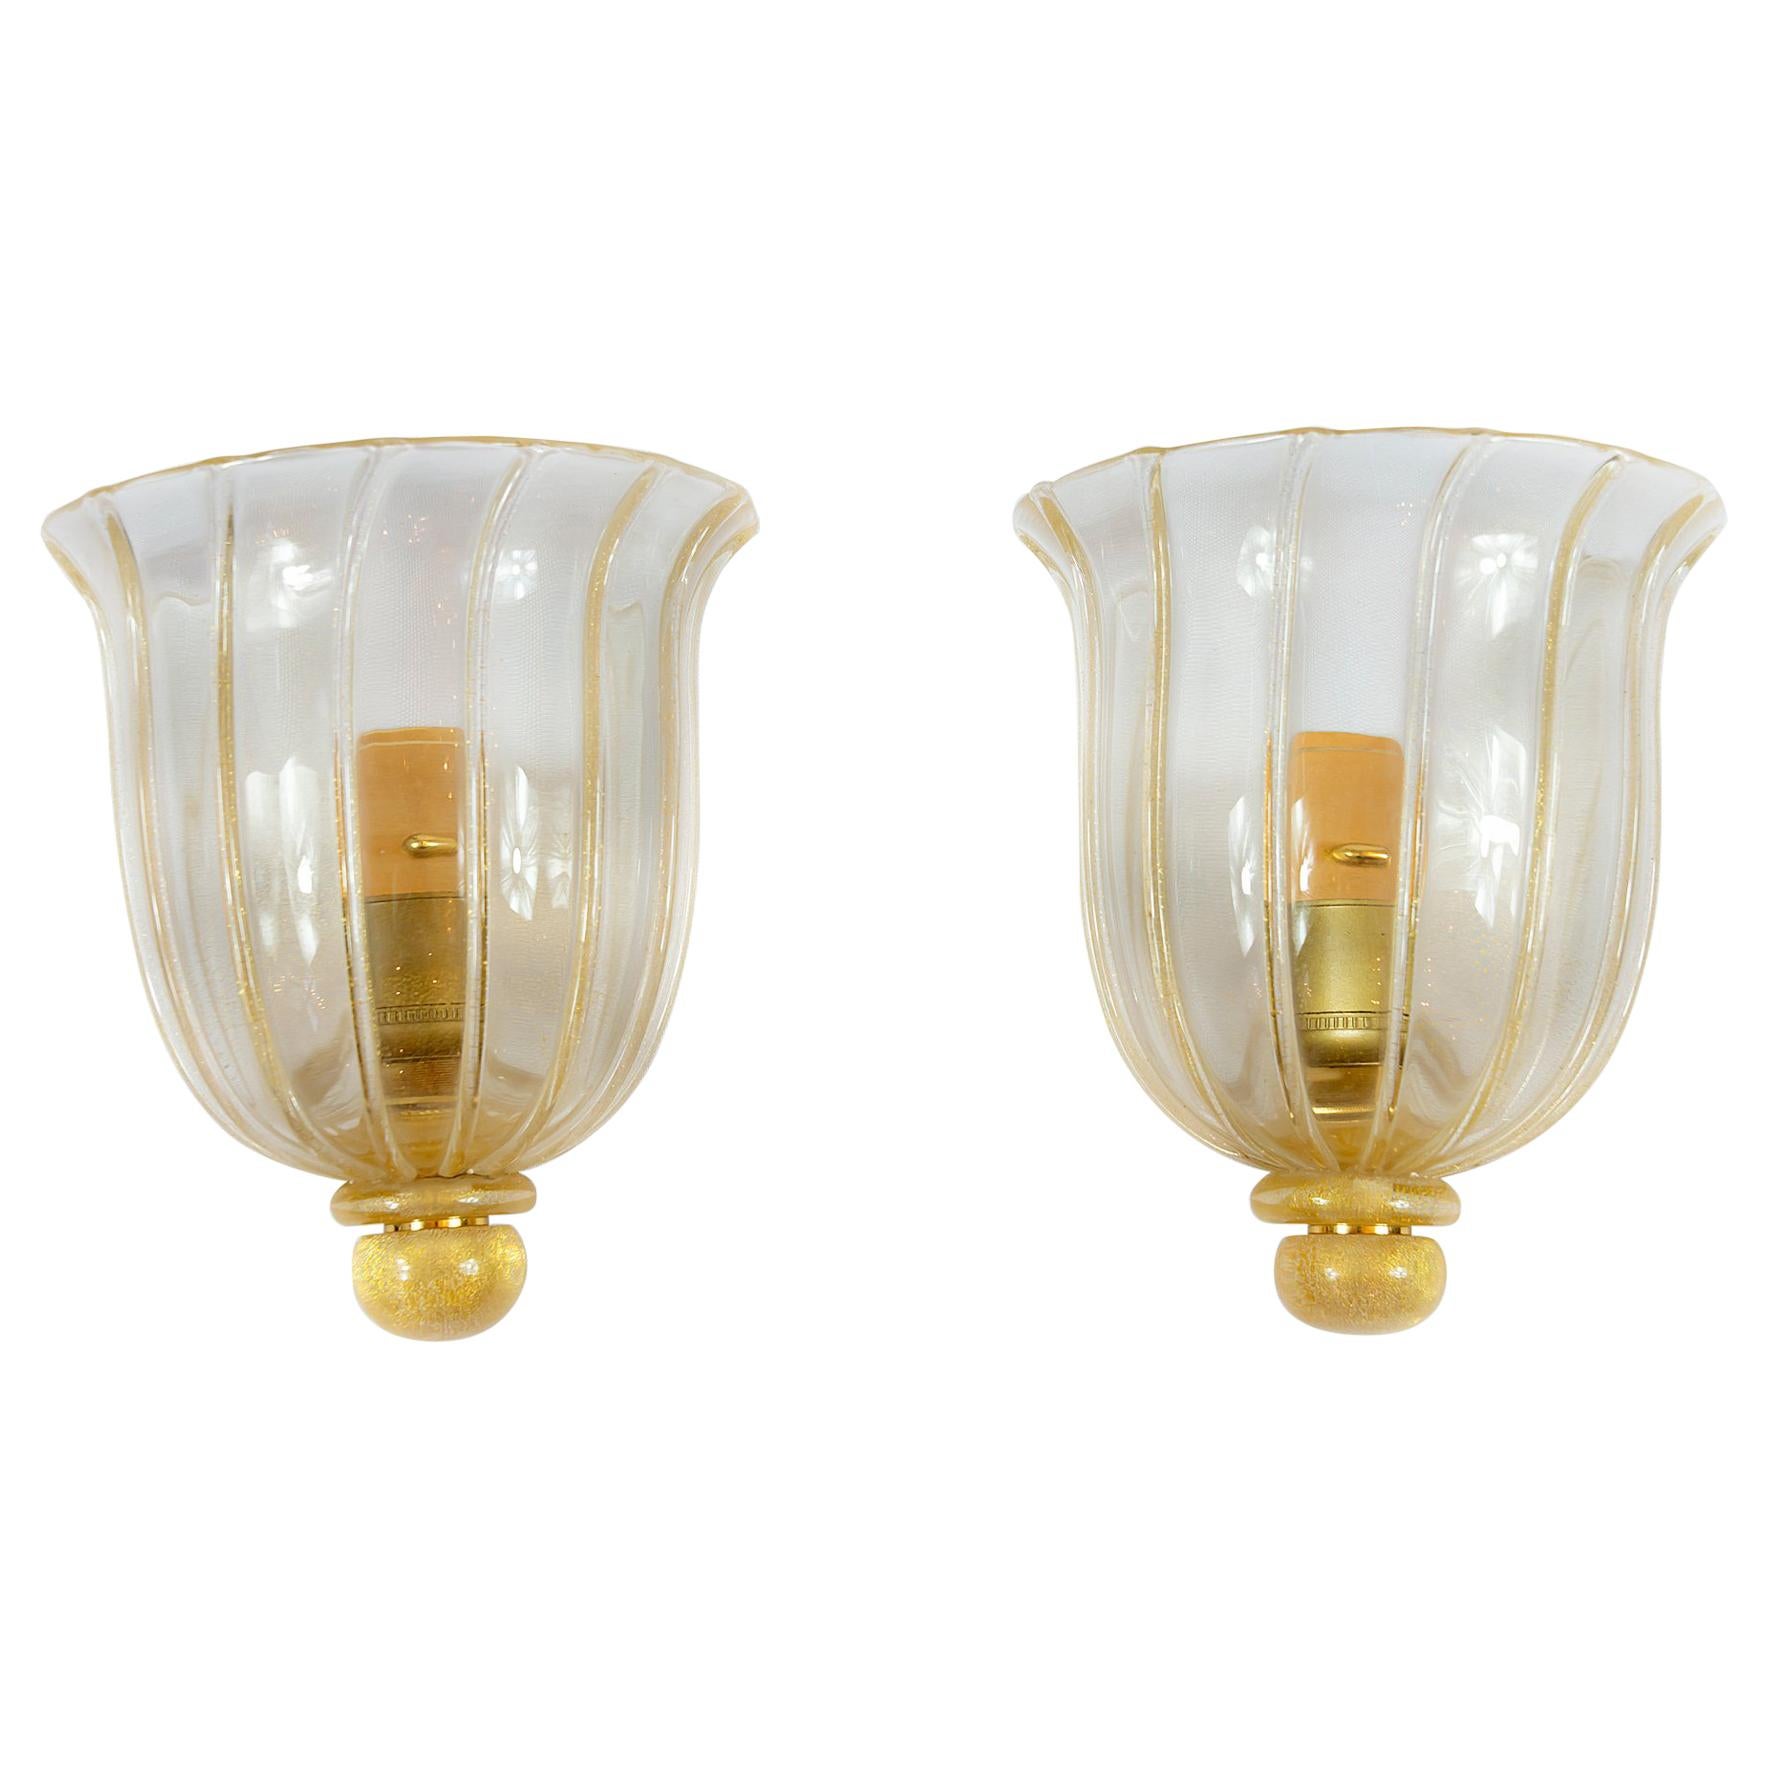 Pair of Italian Murano Glass and Brass Wall Light Sconces by Seguso, circa 1970